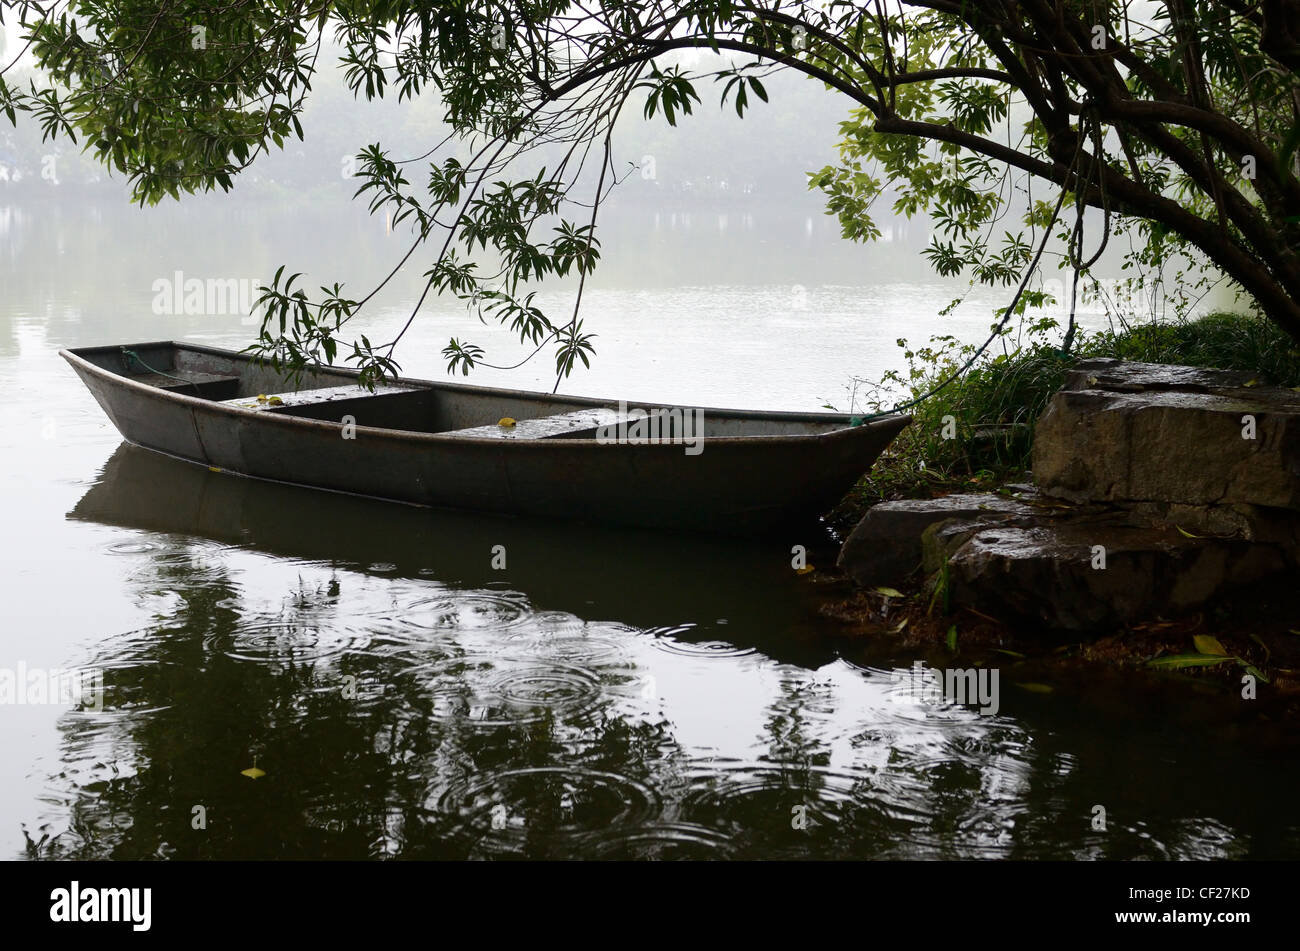 Steel boat in rain moored at Three Pools Mirroring the Moon Island West Lake Hangzhou Peoples Republic of China Stock Photo